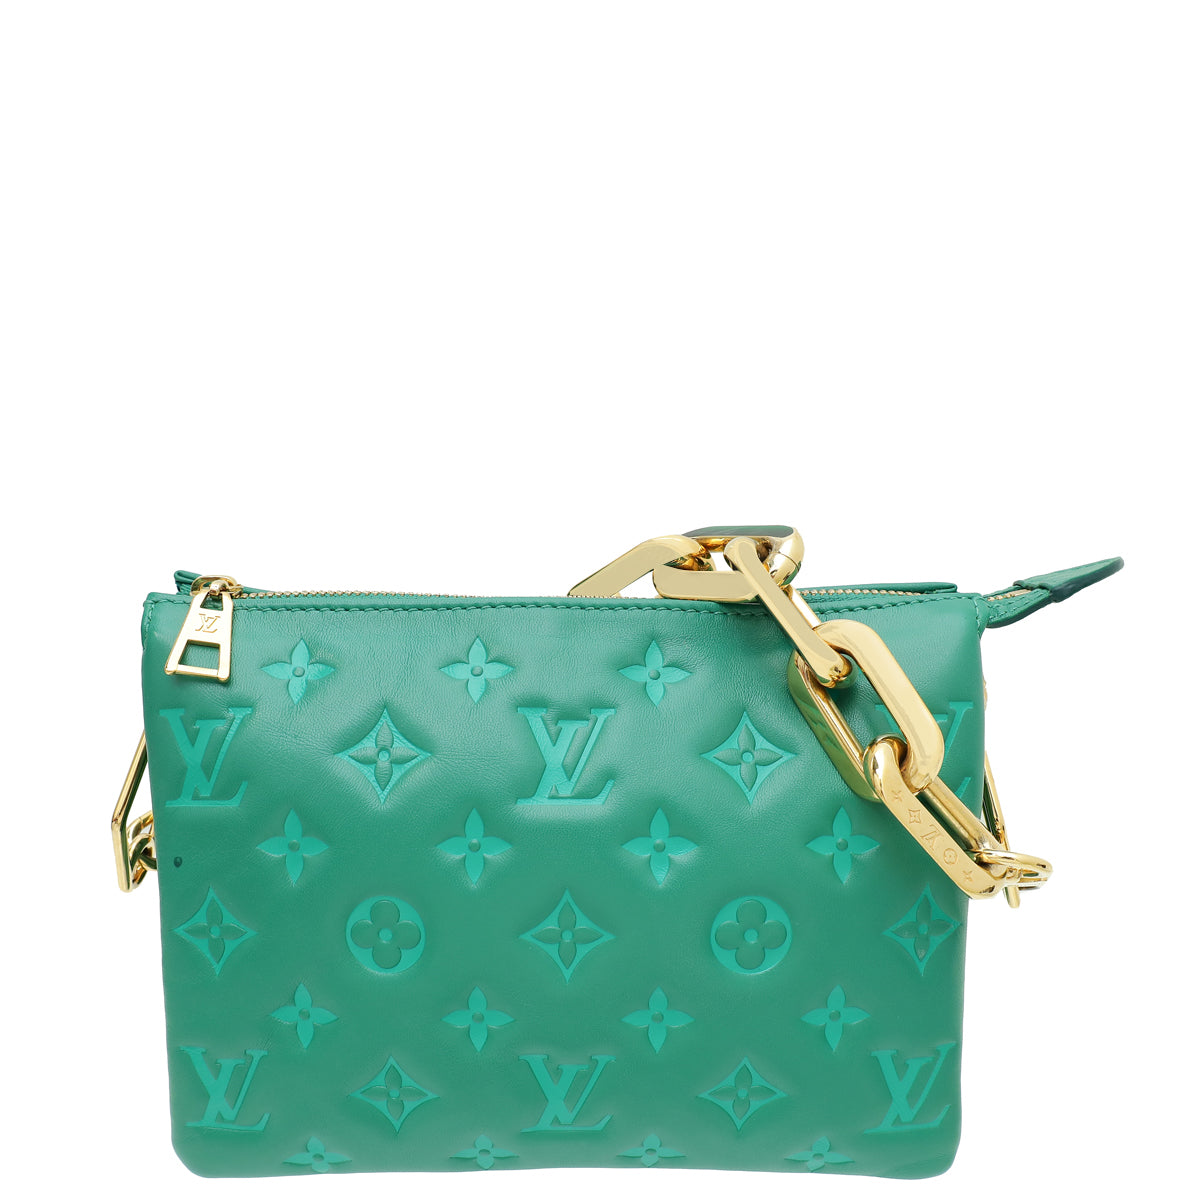 Louis Vuitton Green Monogram Embossed Coussin BB Bag W/ Resin Inserts Chain